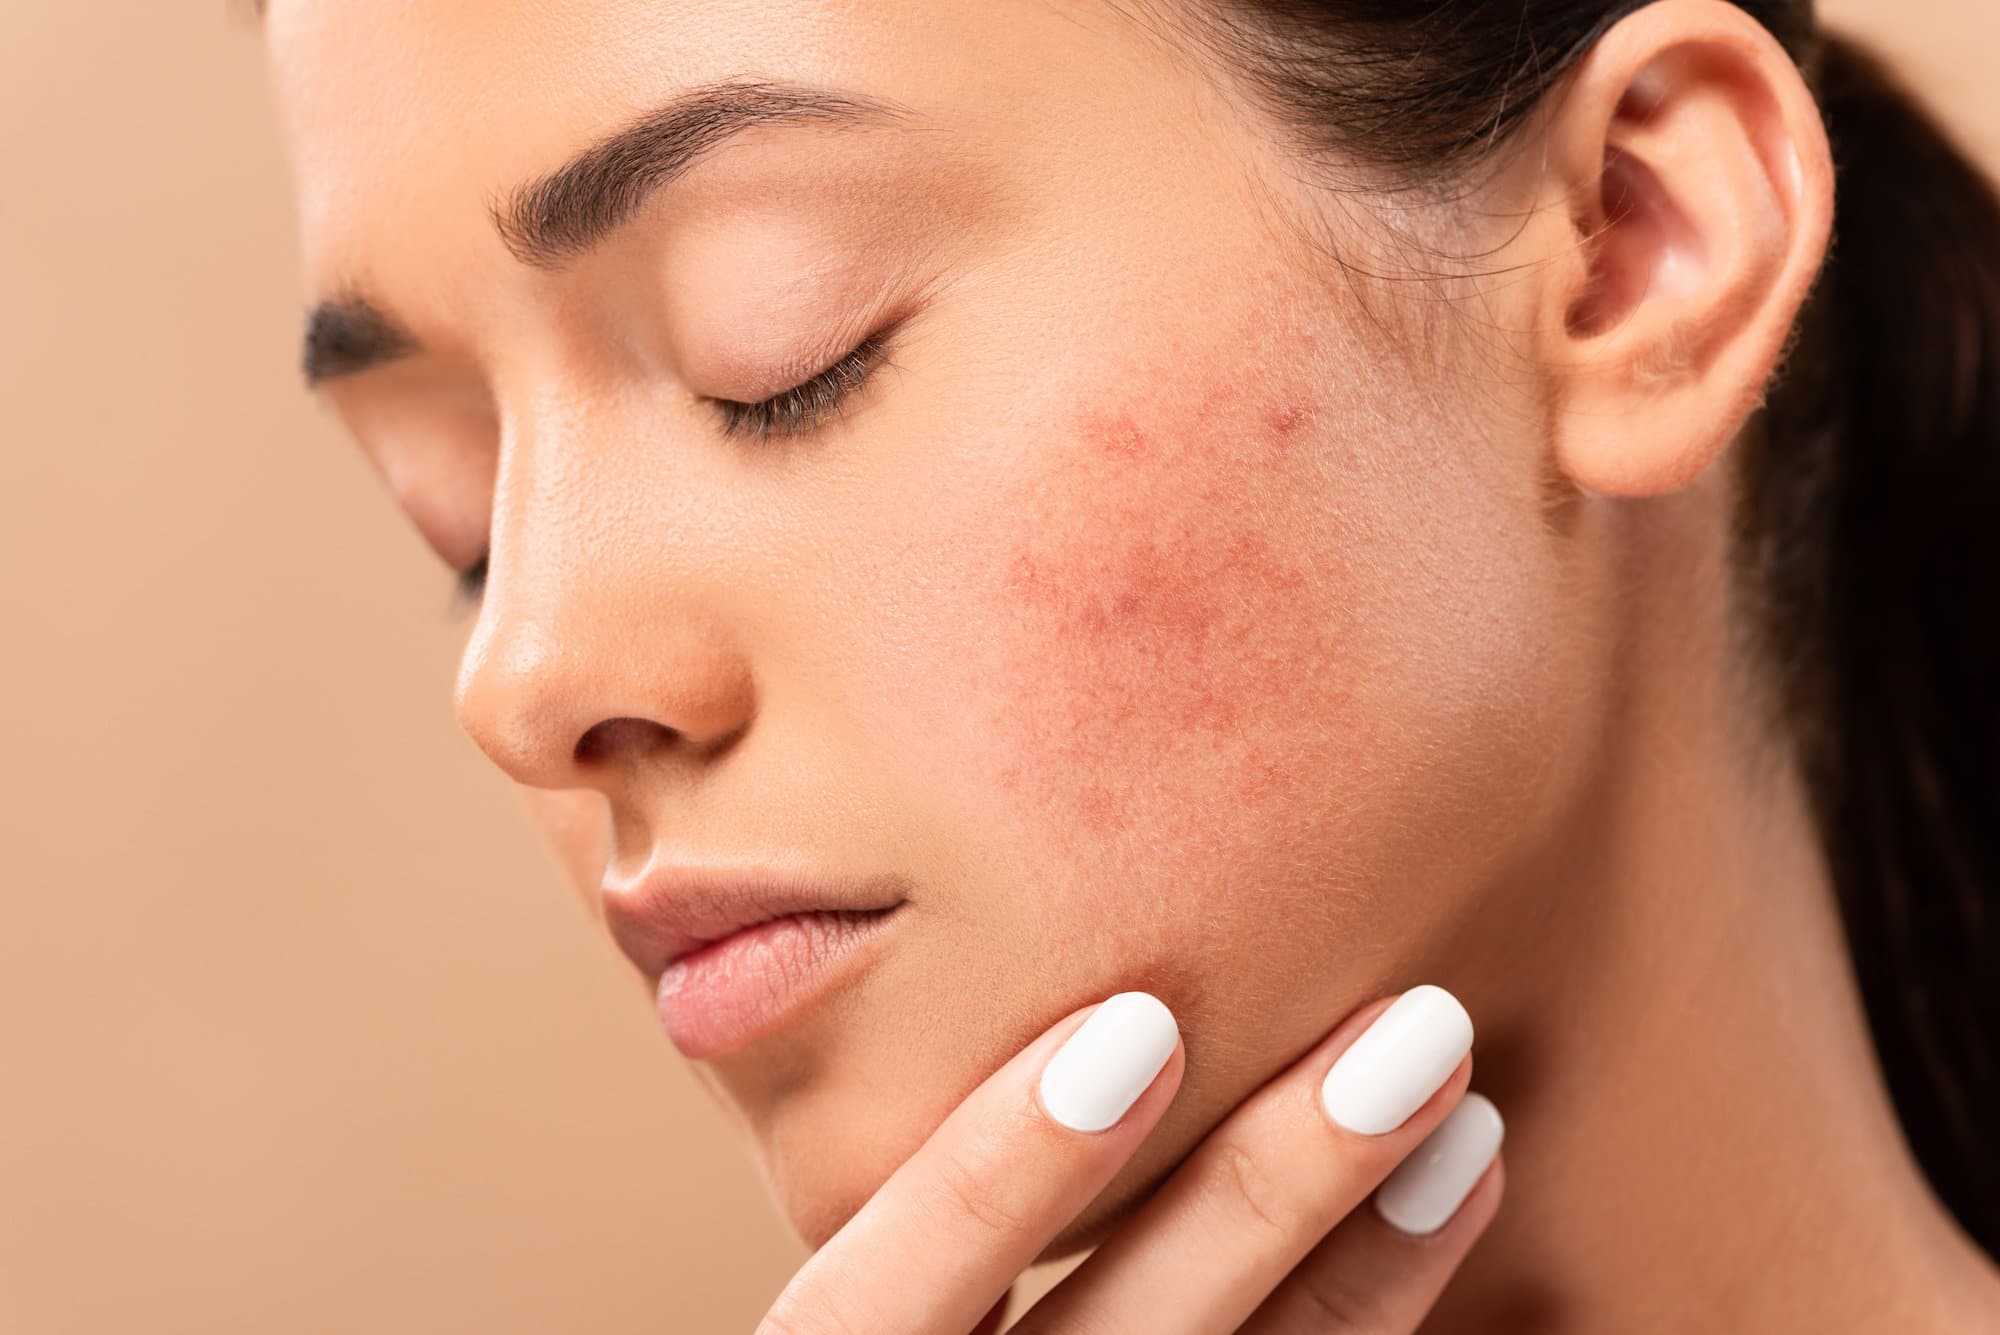 Acne & Acne Scarring